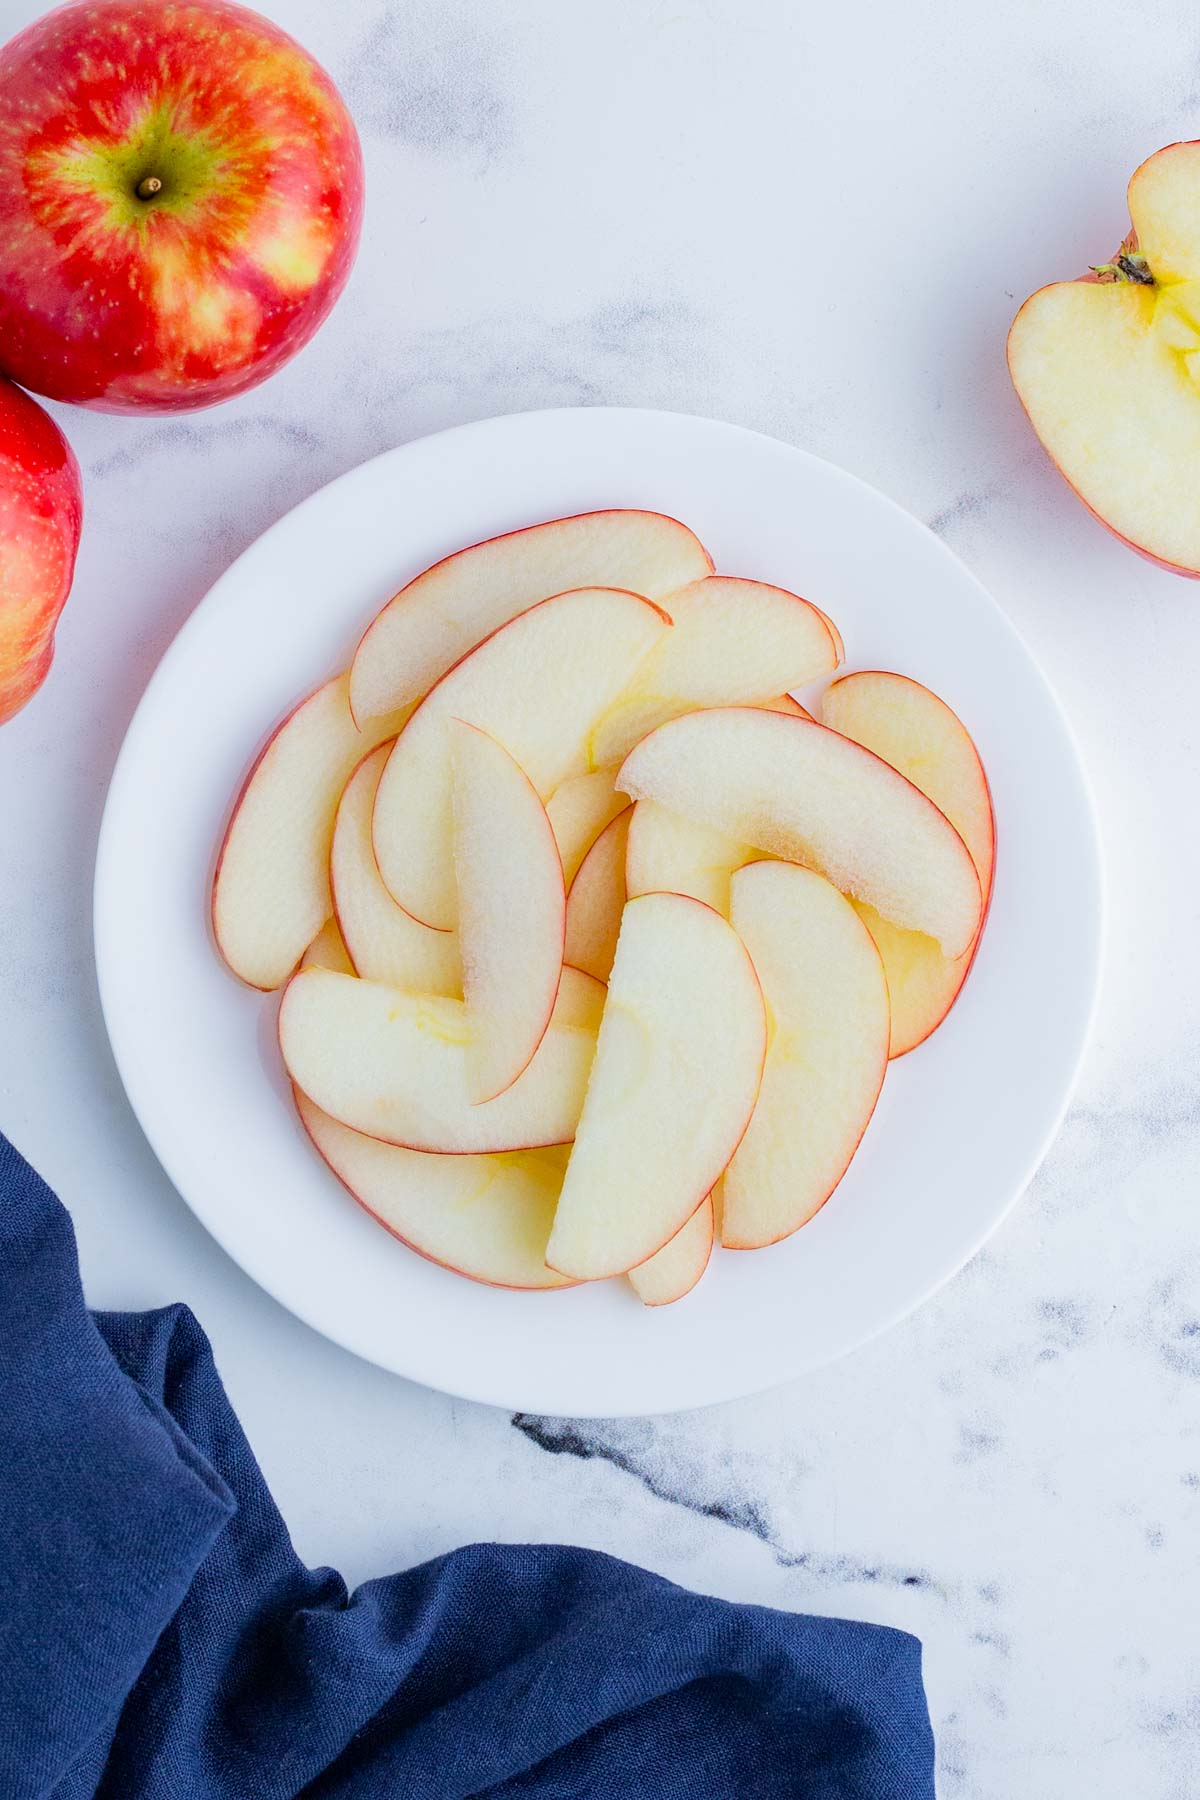 7 Easy Ways to Keep Apples From Browning - Evolving Table